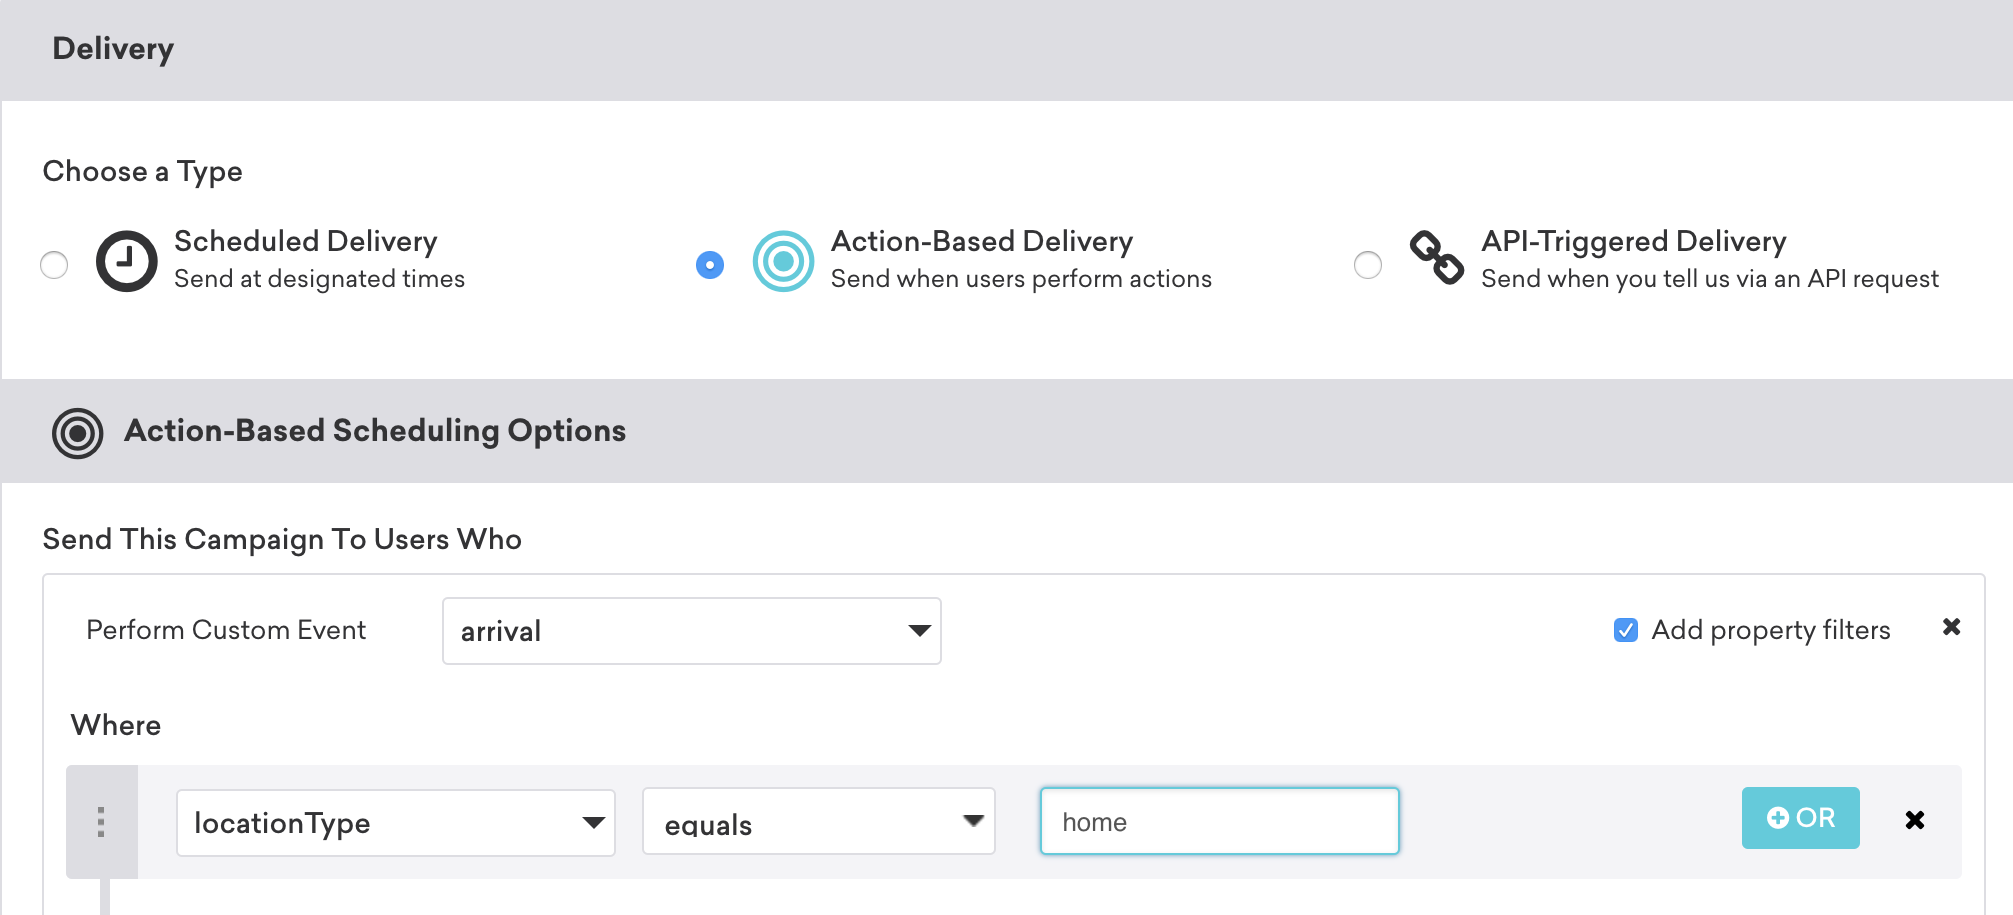 An action-based campaign in the delivery step showing "arrival" selected as the "perform custom event" option, where "locationType" equals "home".